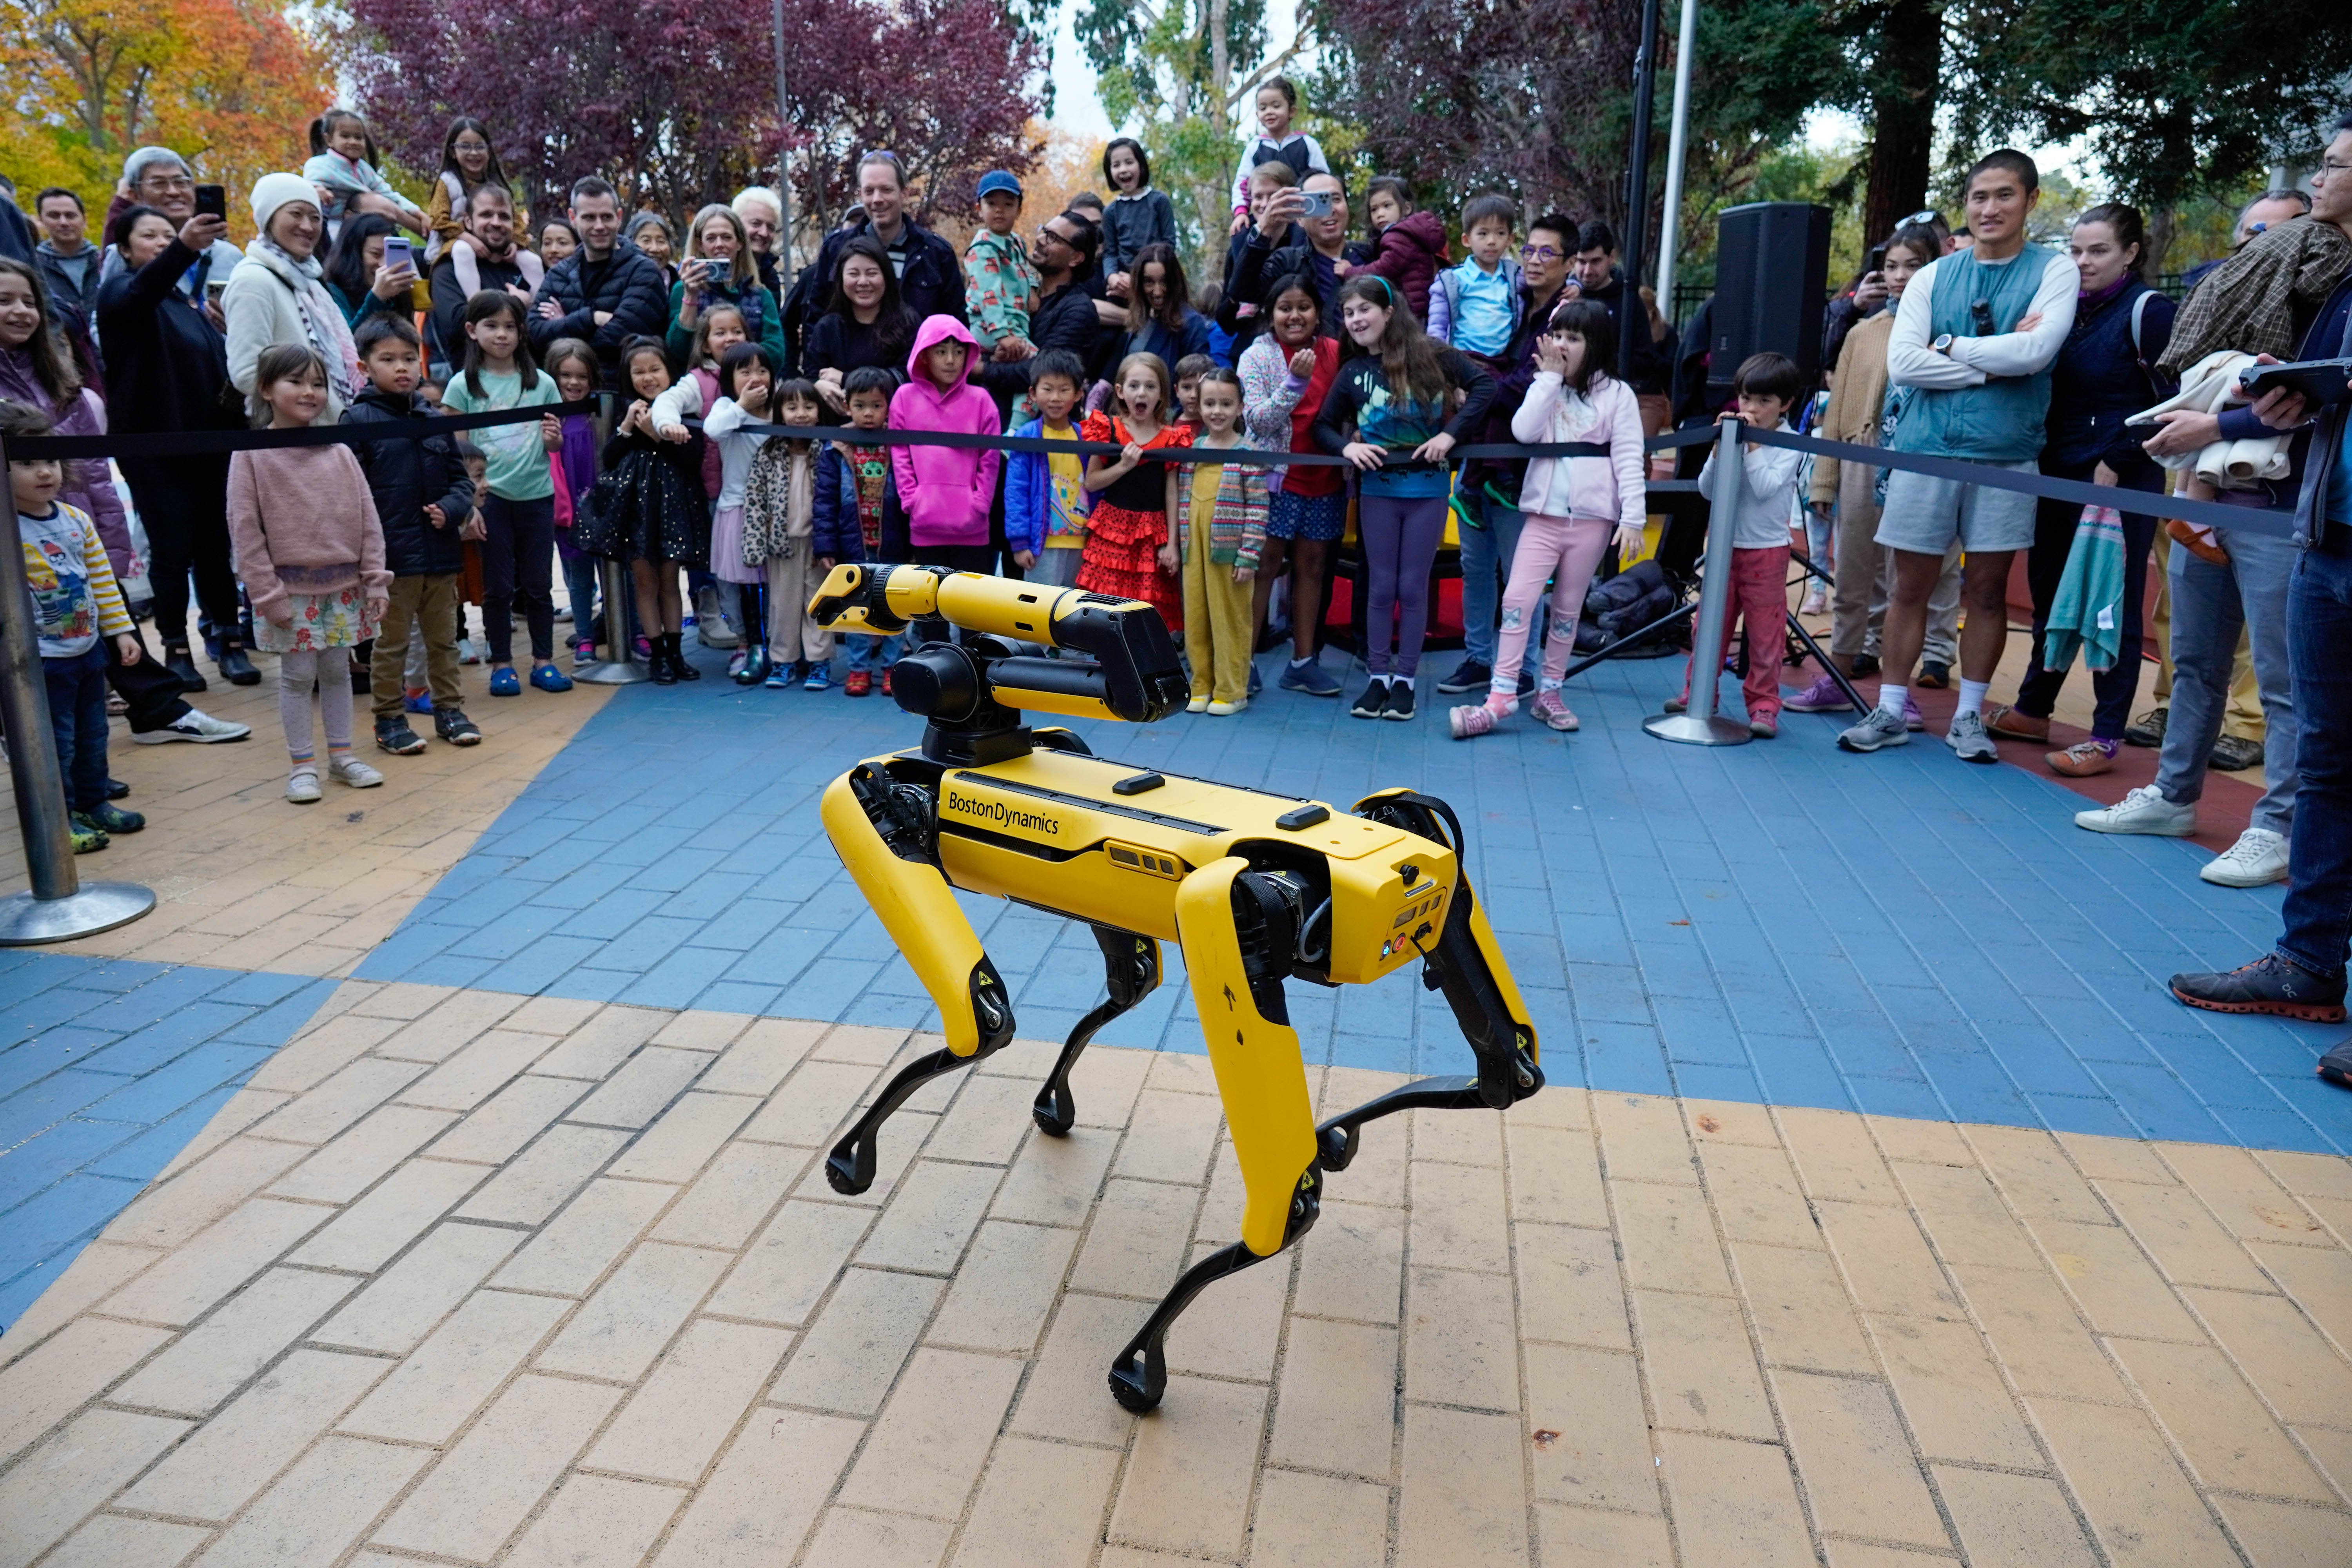 Robot dog on display for the crowd at Arts Night.